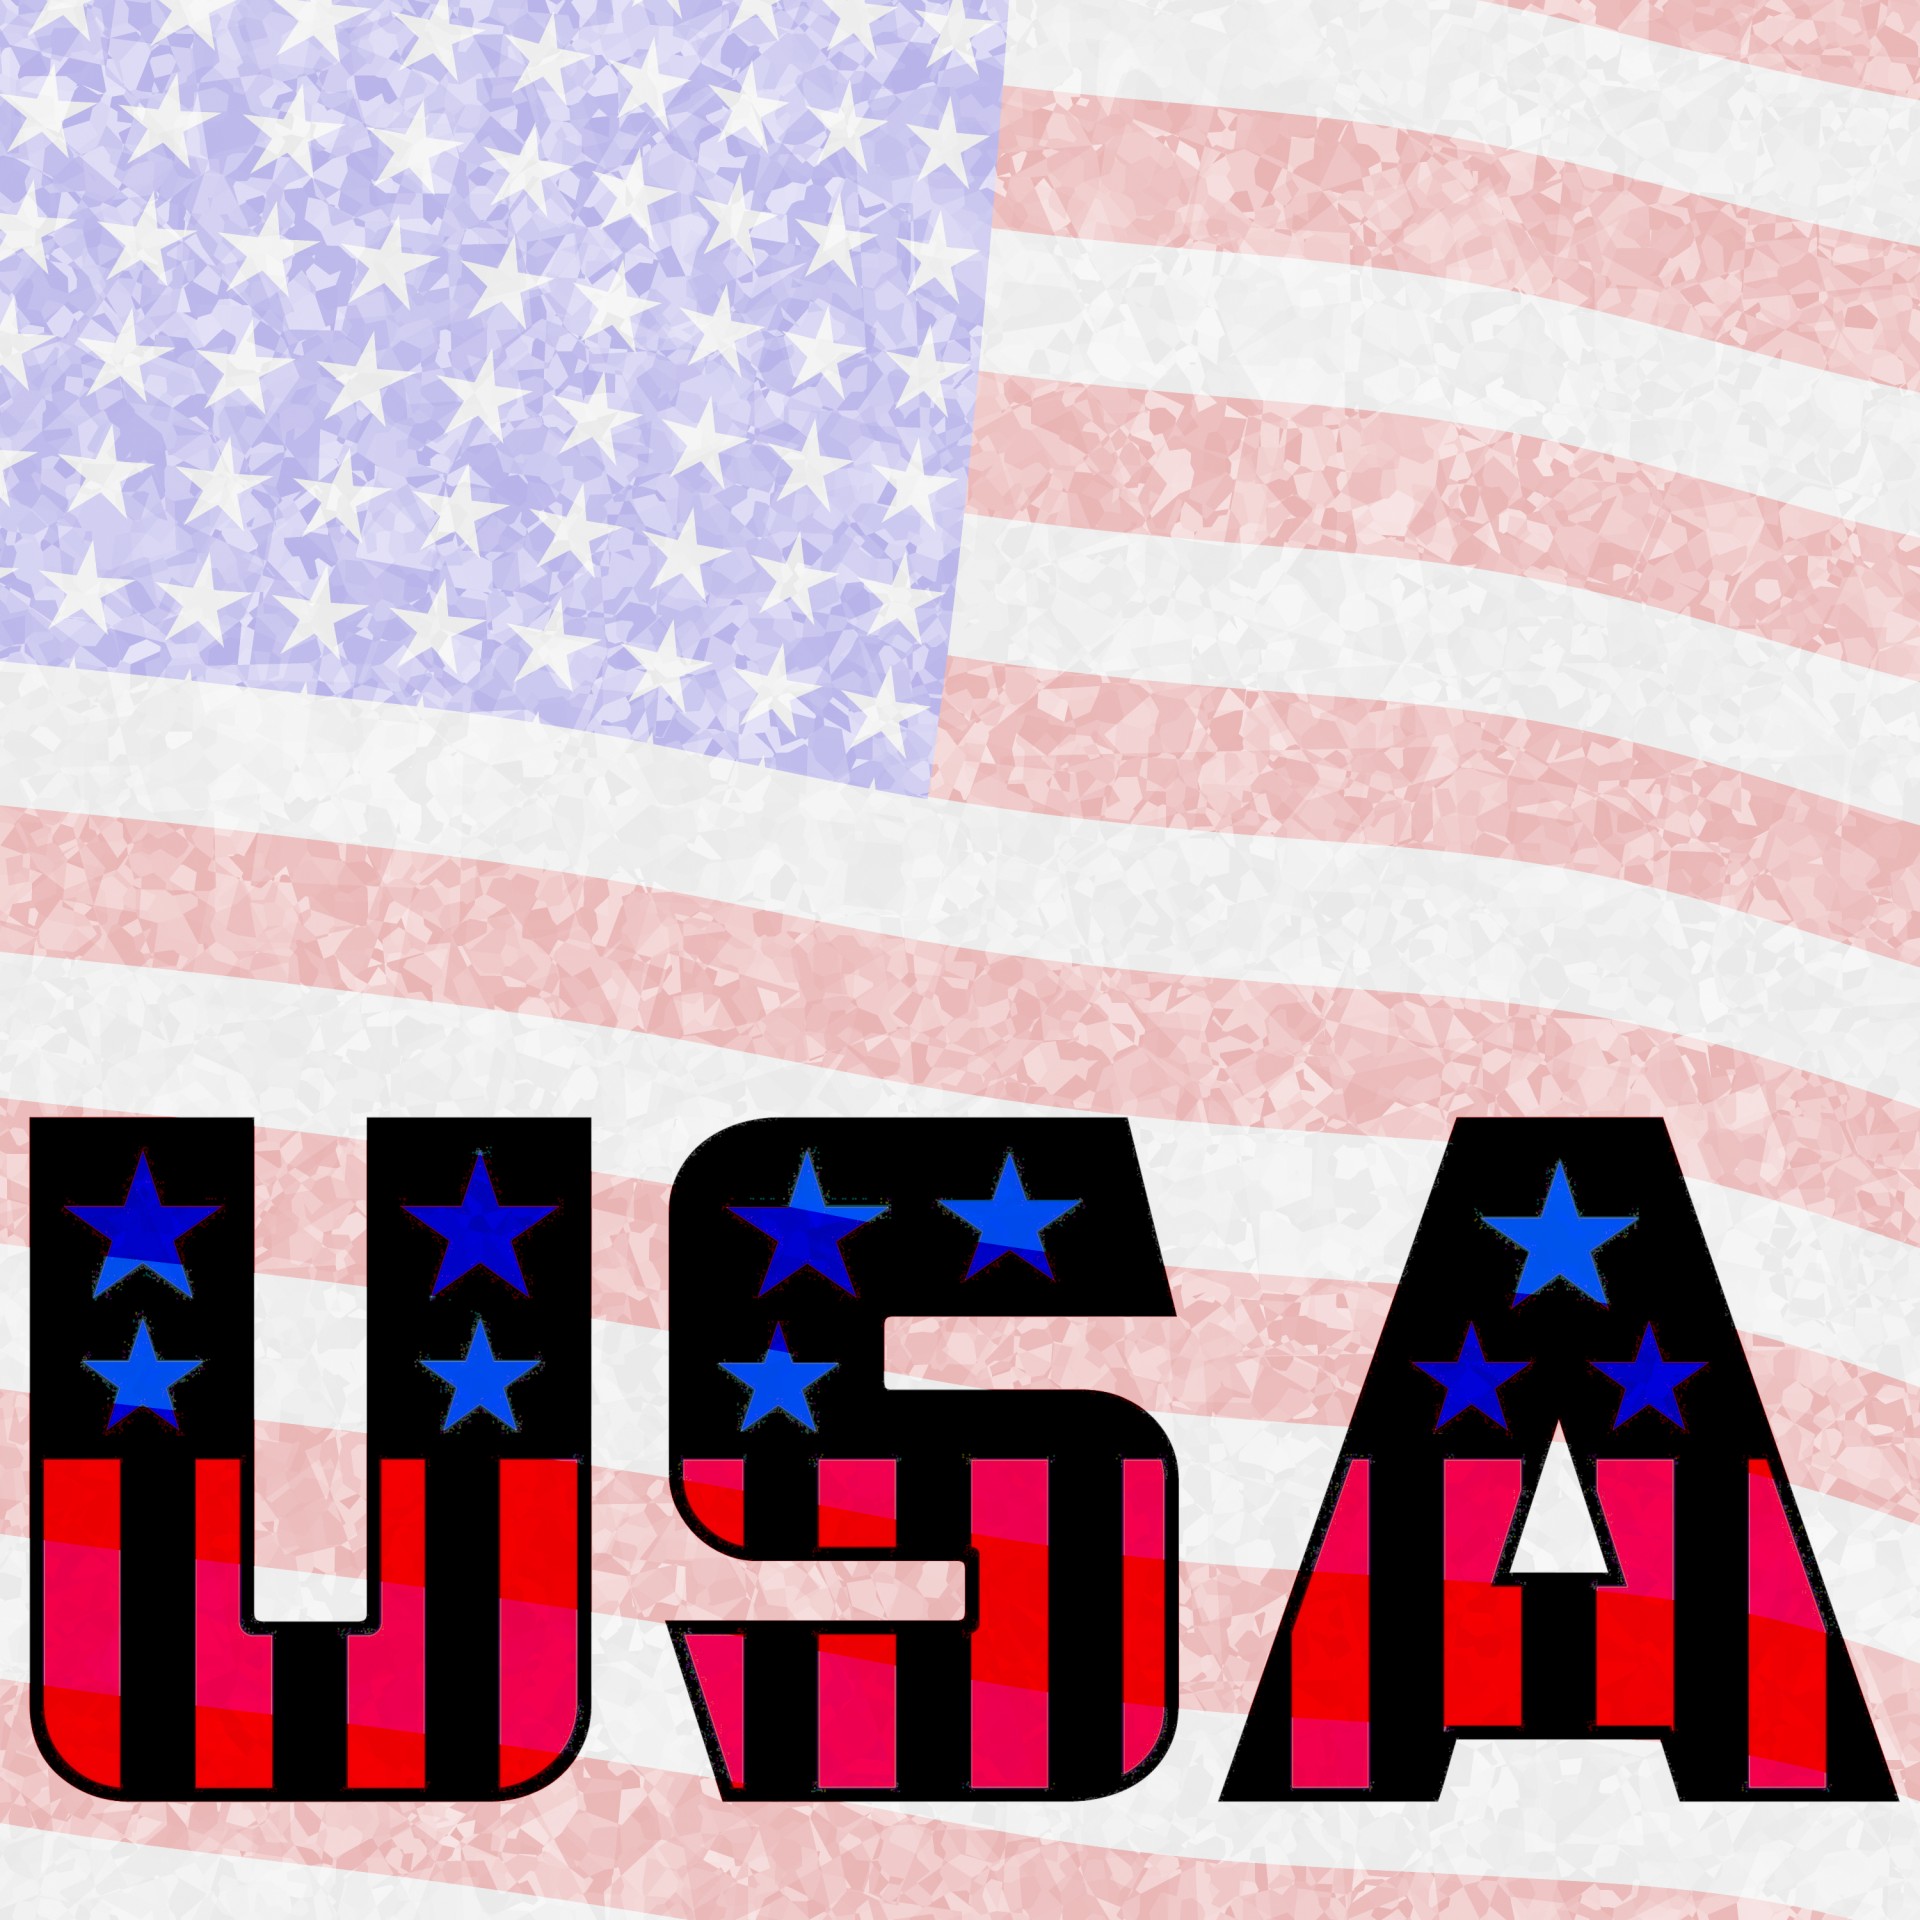 United States flag with usa text